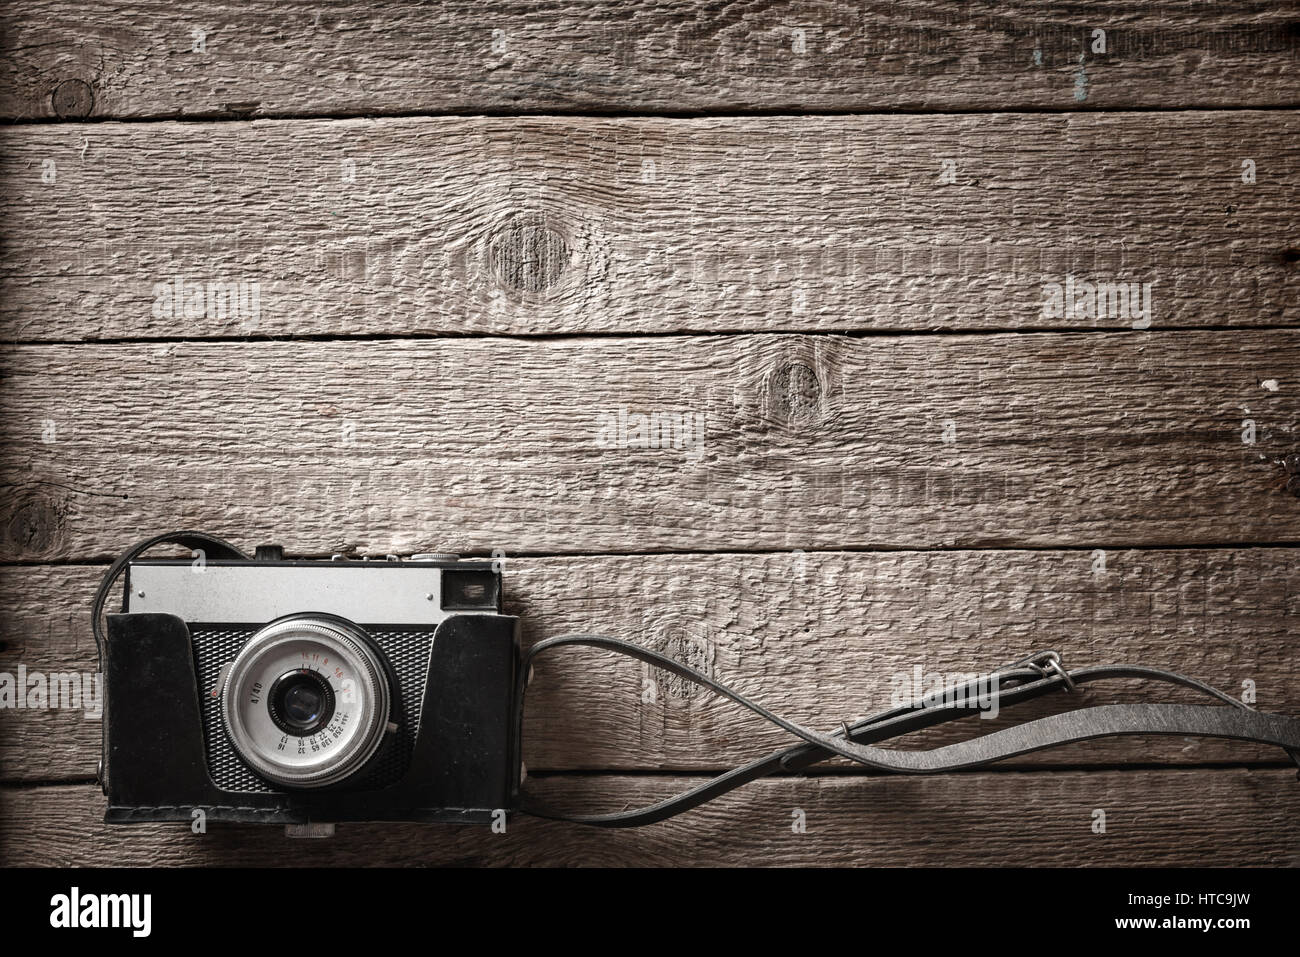 photography background with old camera and wooden table Stock ...